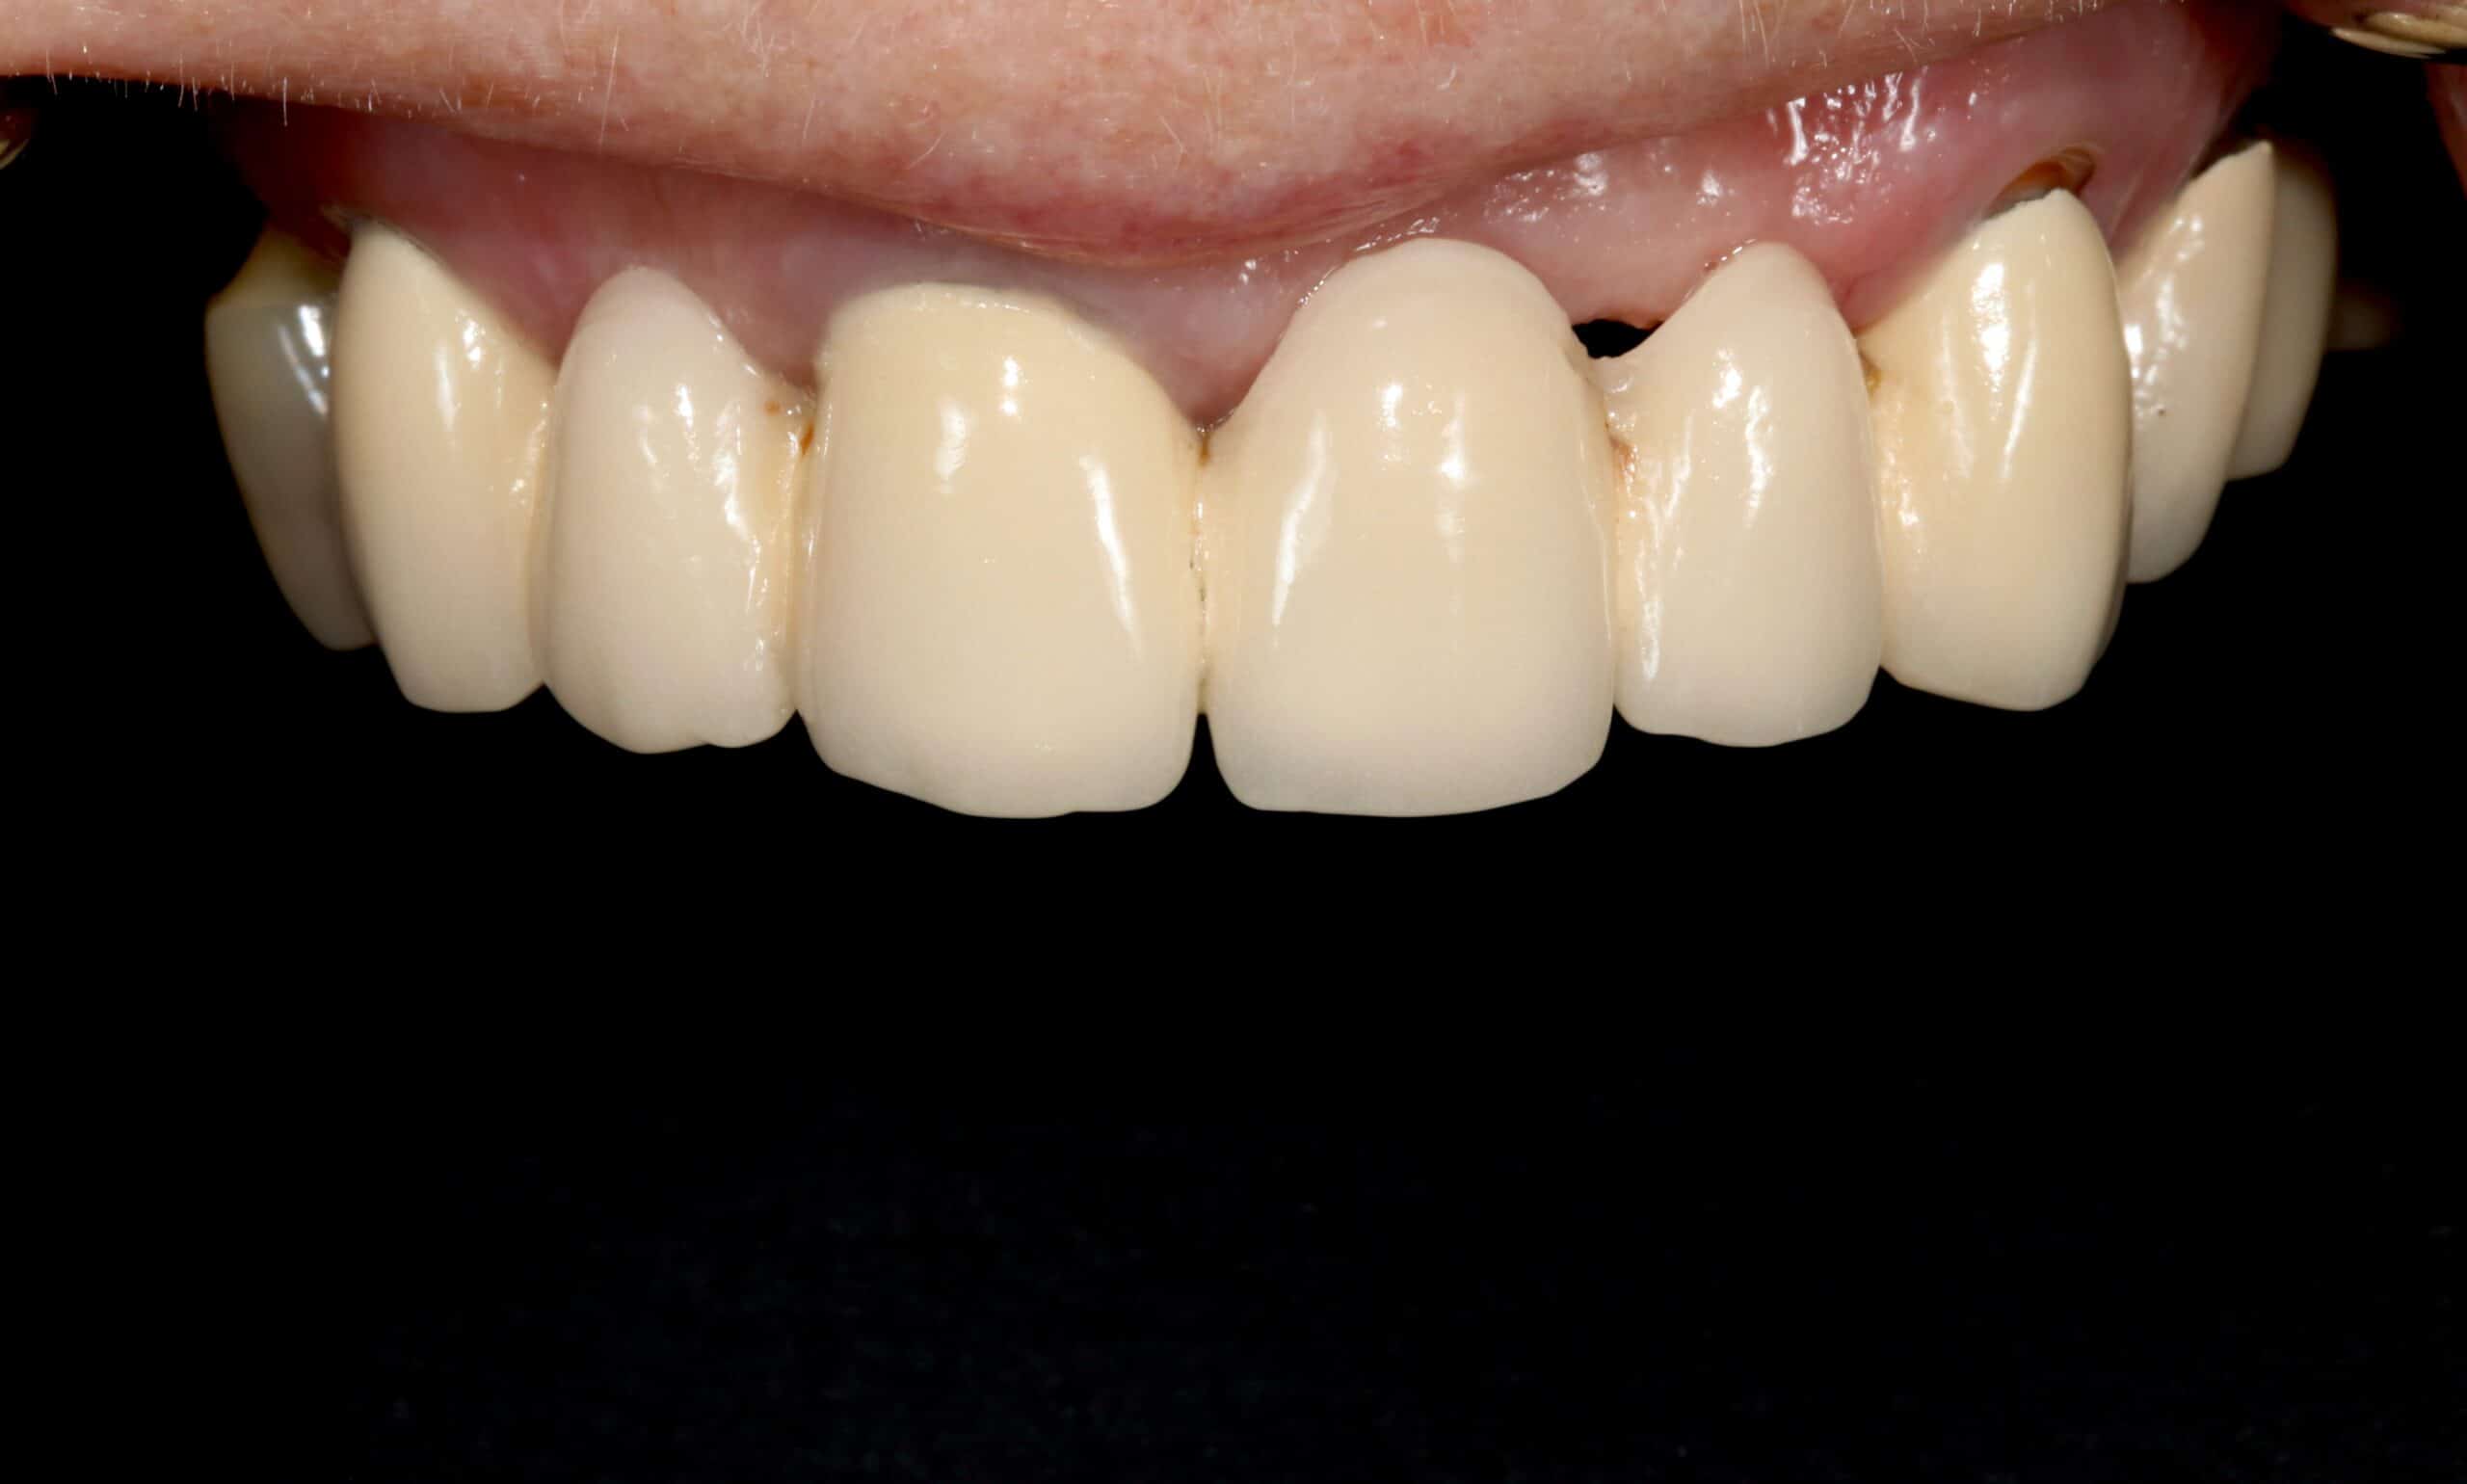 A close-up photo of a patient’s worn teeth and gums before receiving porcelain crowns at Signature Dentistry of Denver